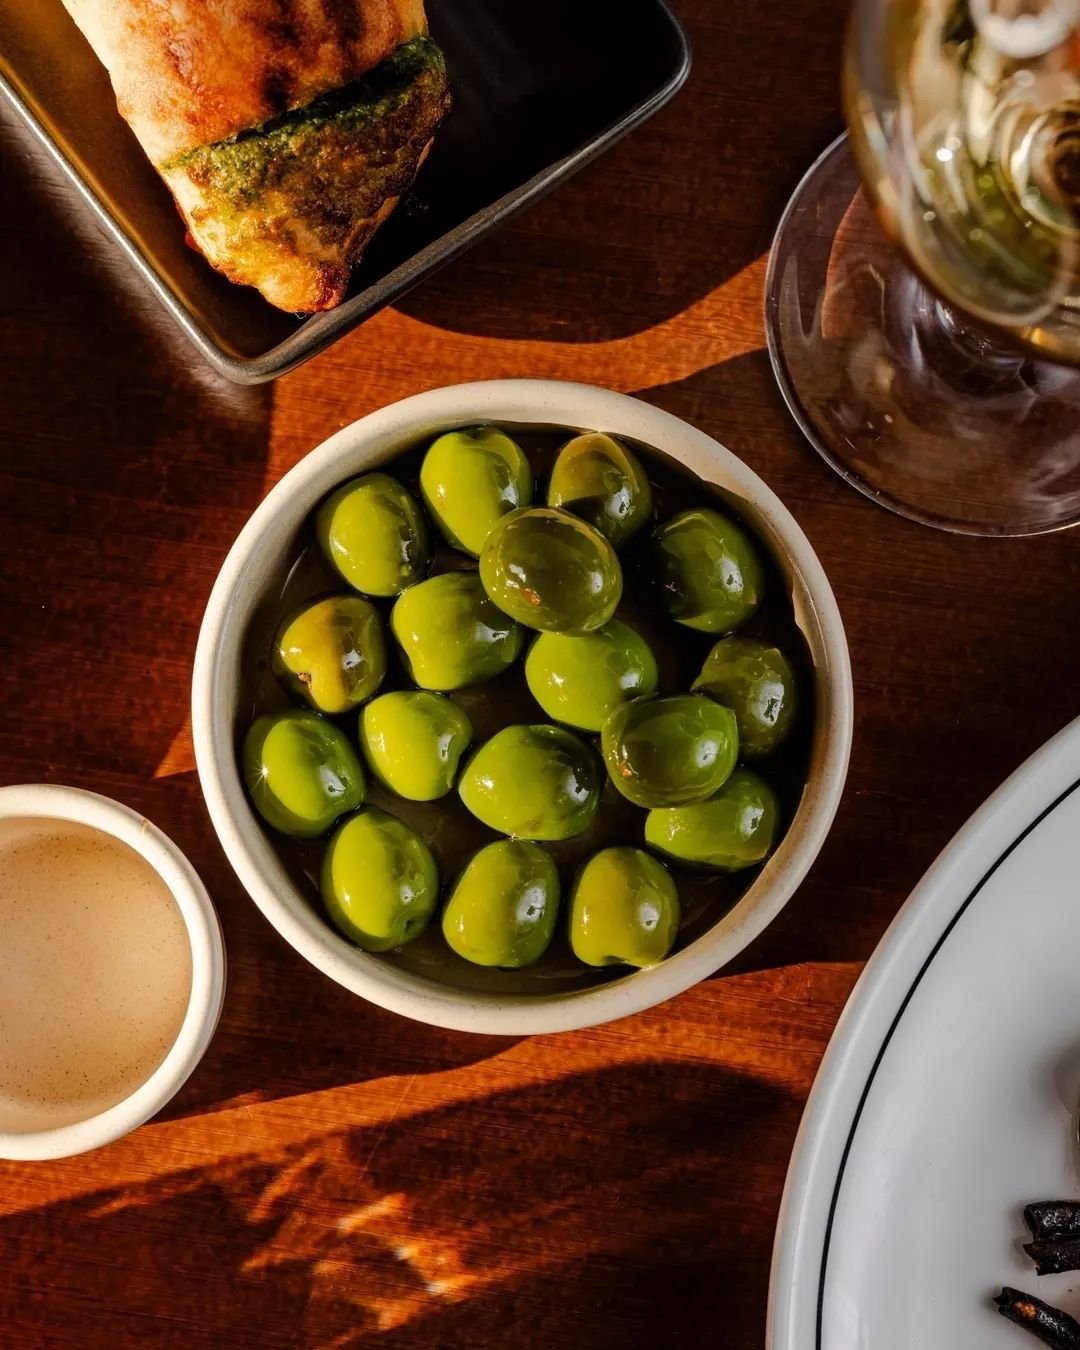 Always start with marinated Sicilian olives!&nbsp;

Here from 4pm till late. Link in bio to book!